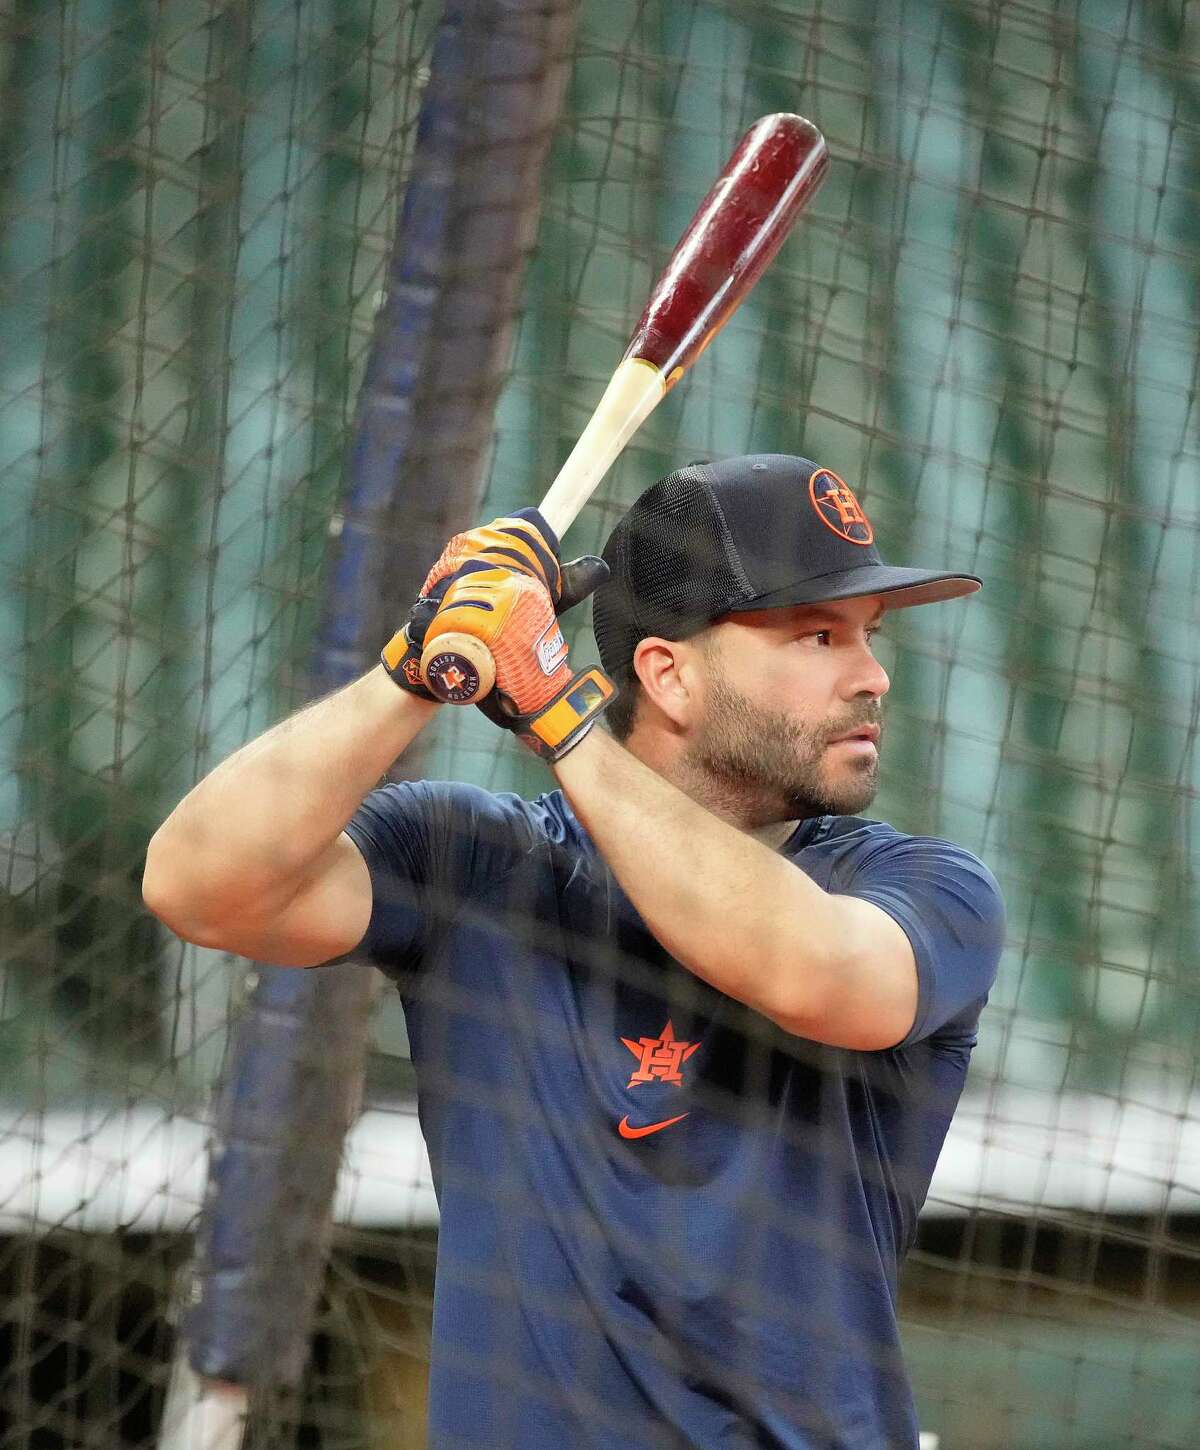 Houston Astros Jose Altuve takes batting practice before the start of a MLB baseball game at Minute Maid Park on Saturday, July 16, 2022 in Houston.